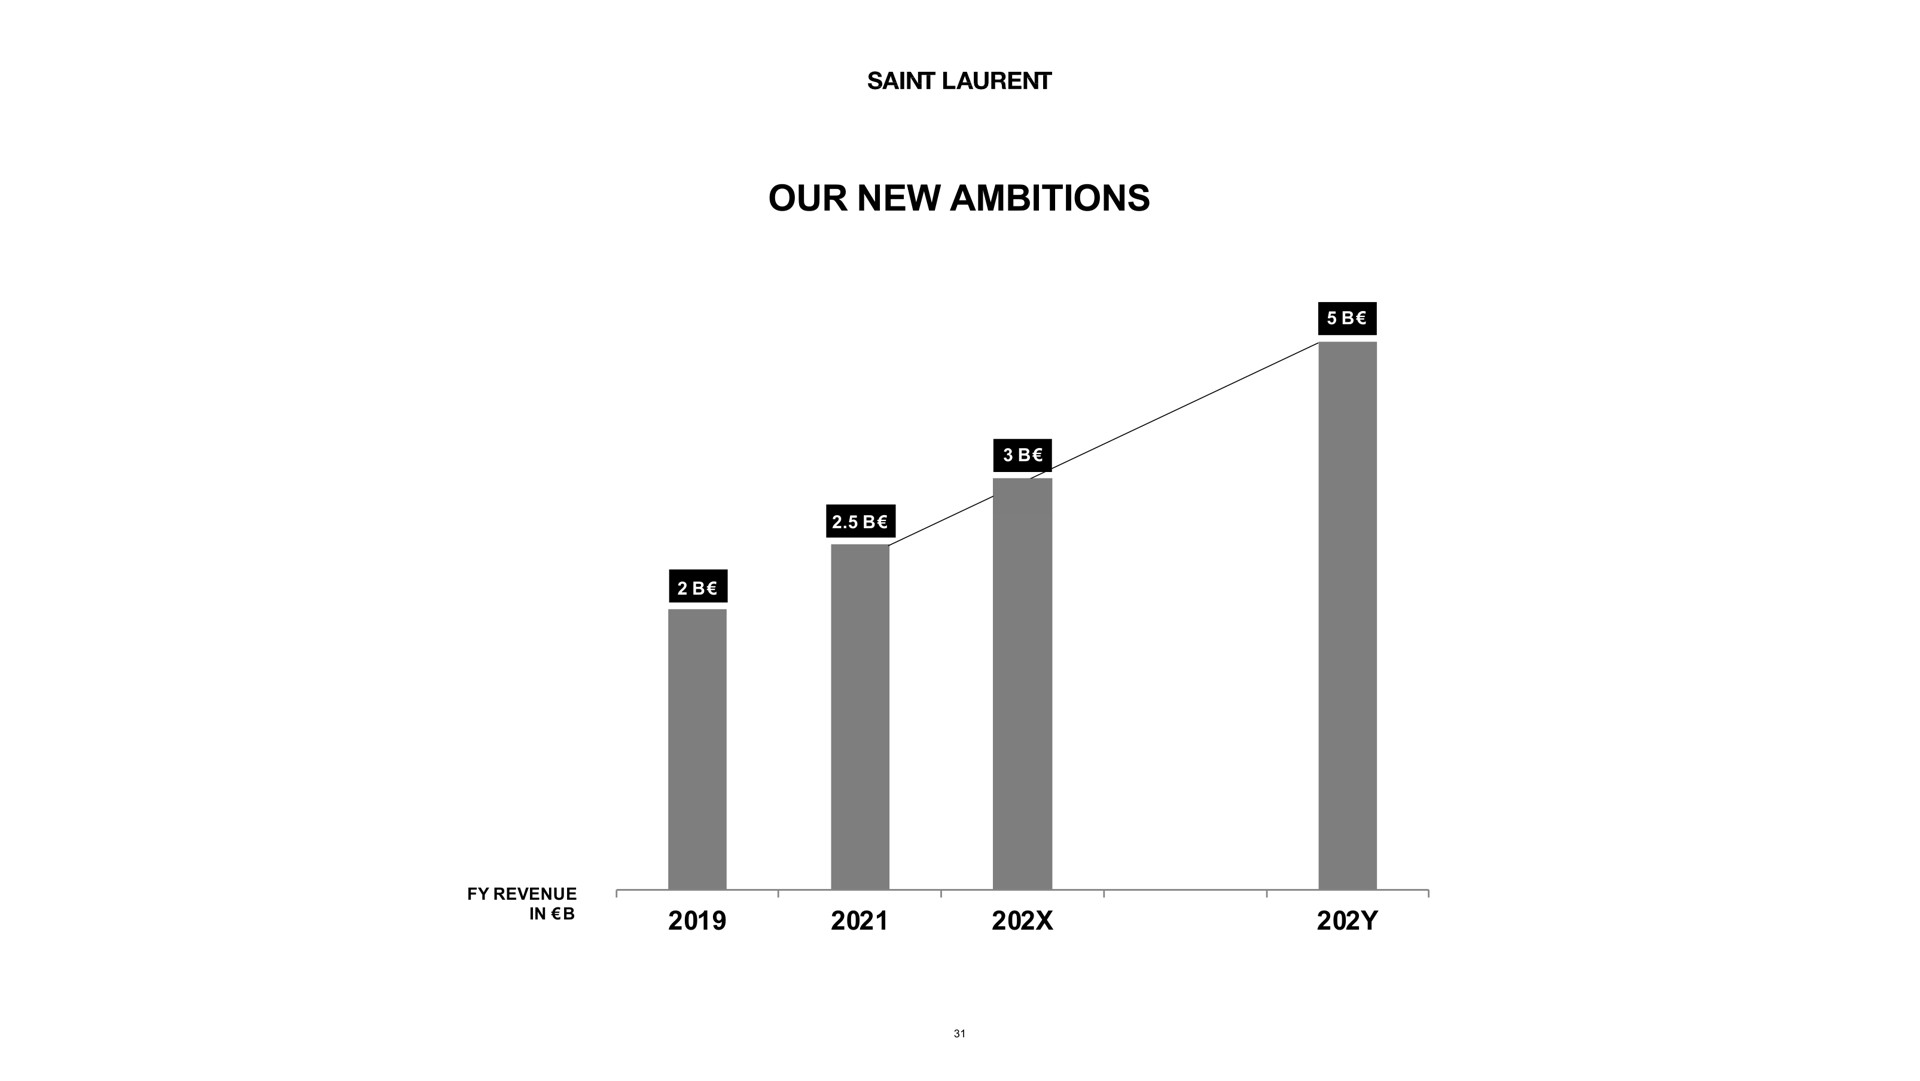 our new ambitions revenue | Kering